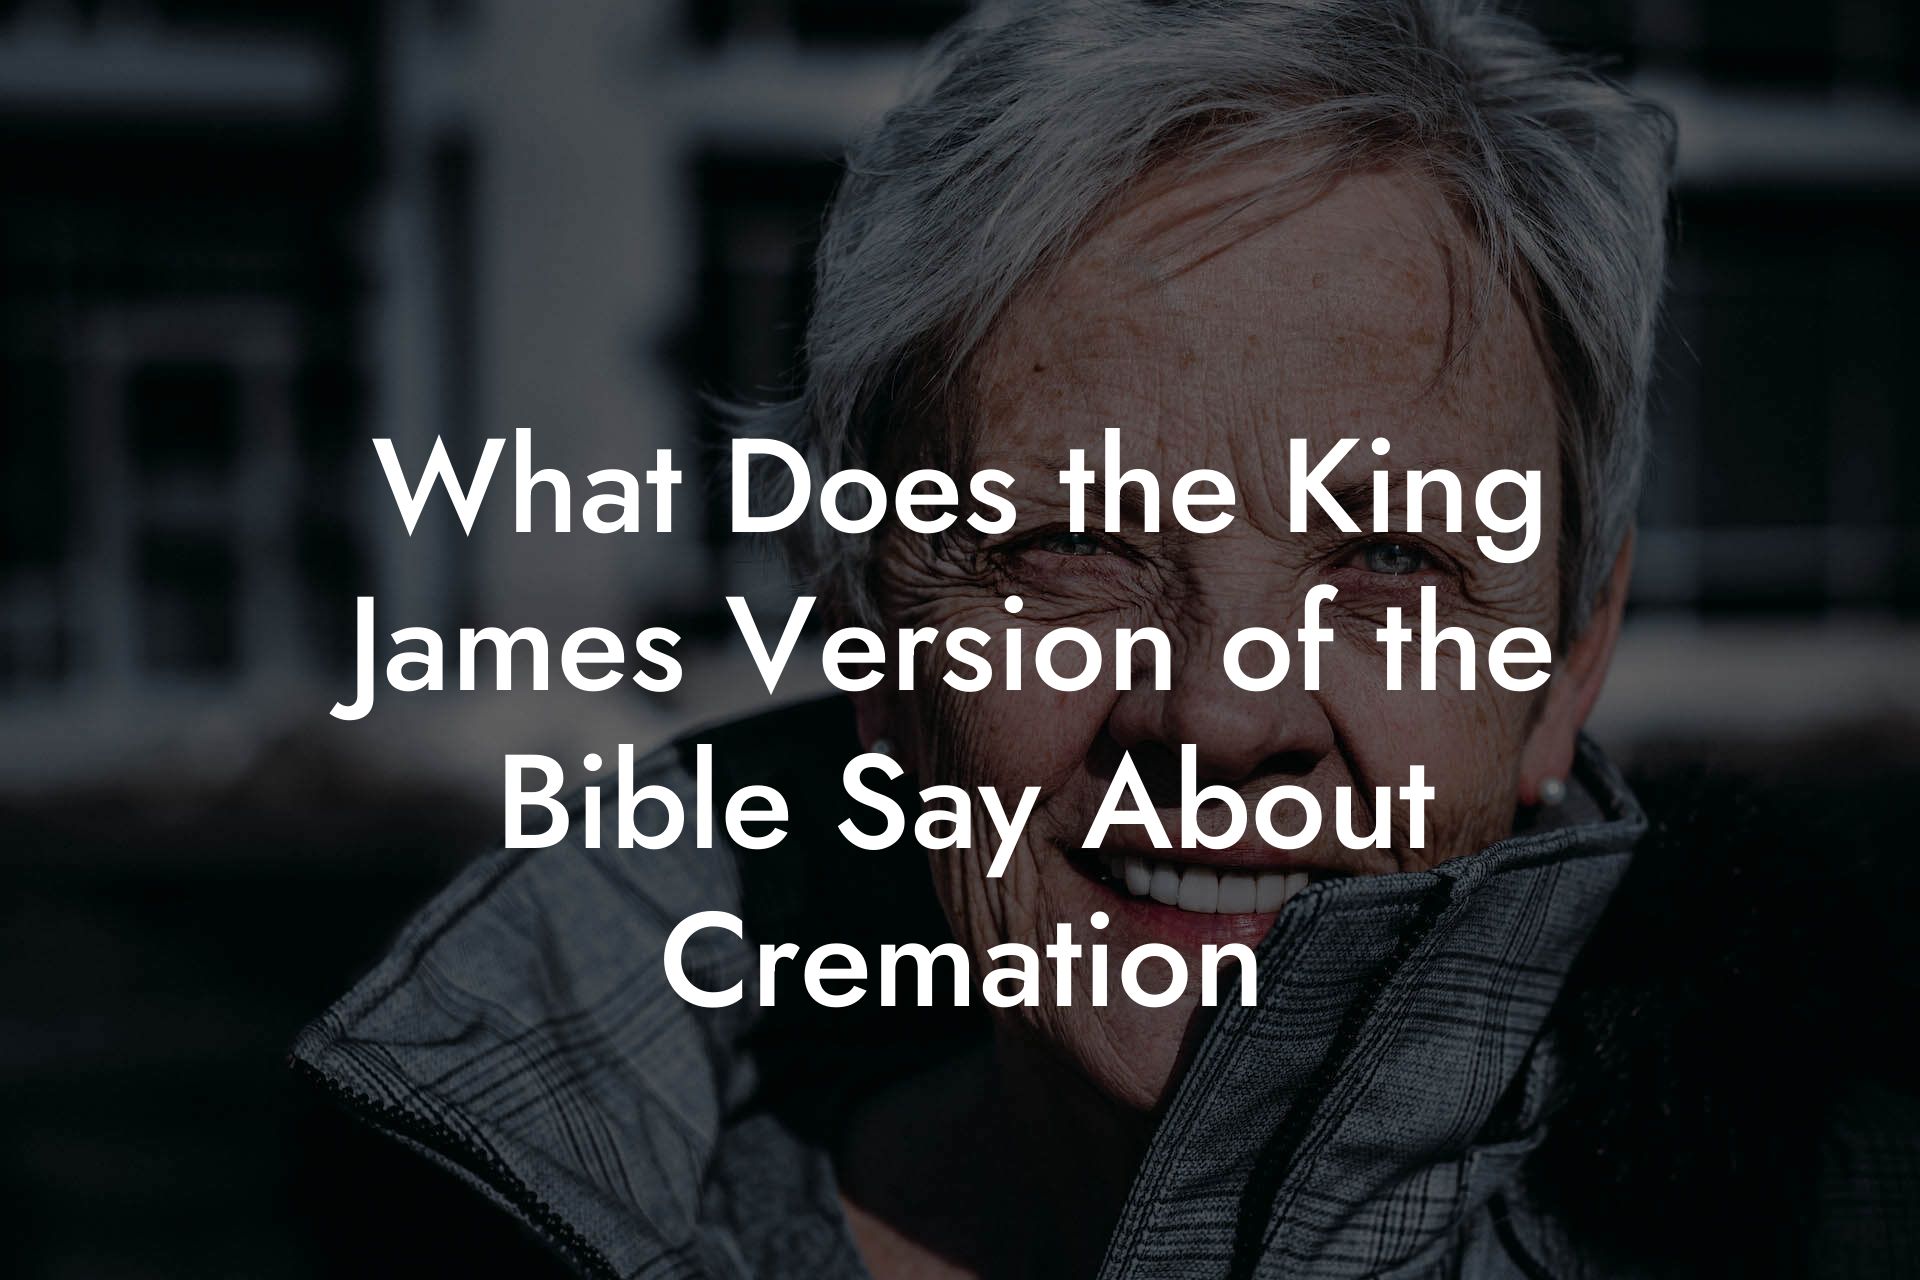 What Does the King James Version of the Bible Say About Cremation